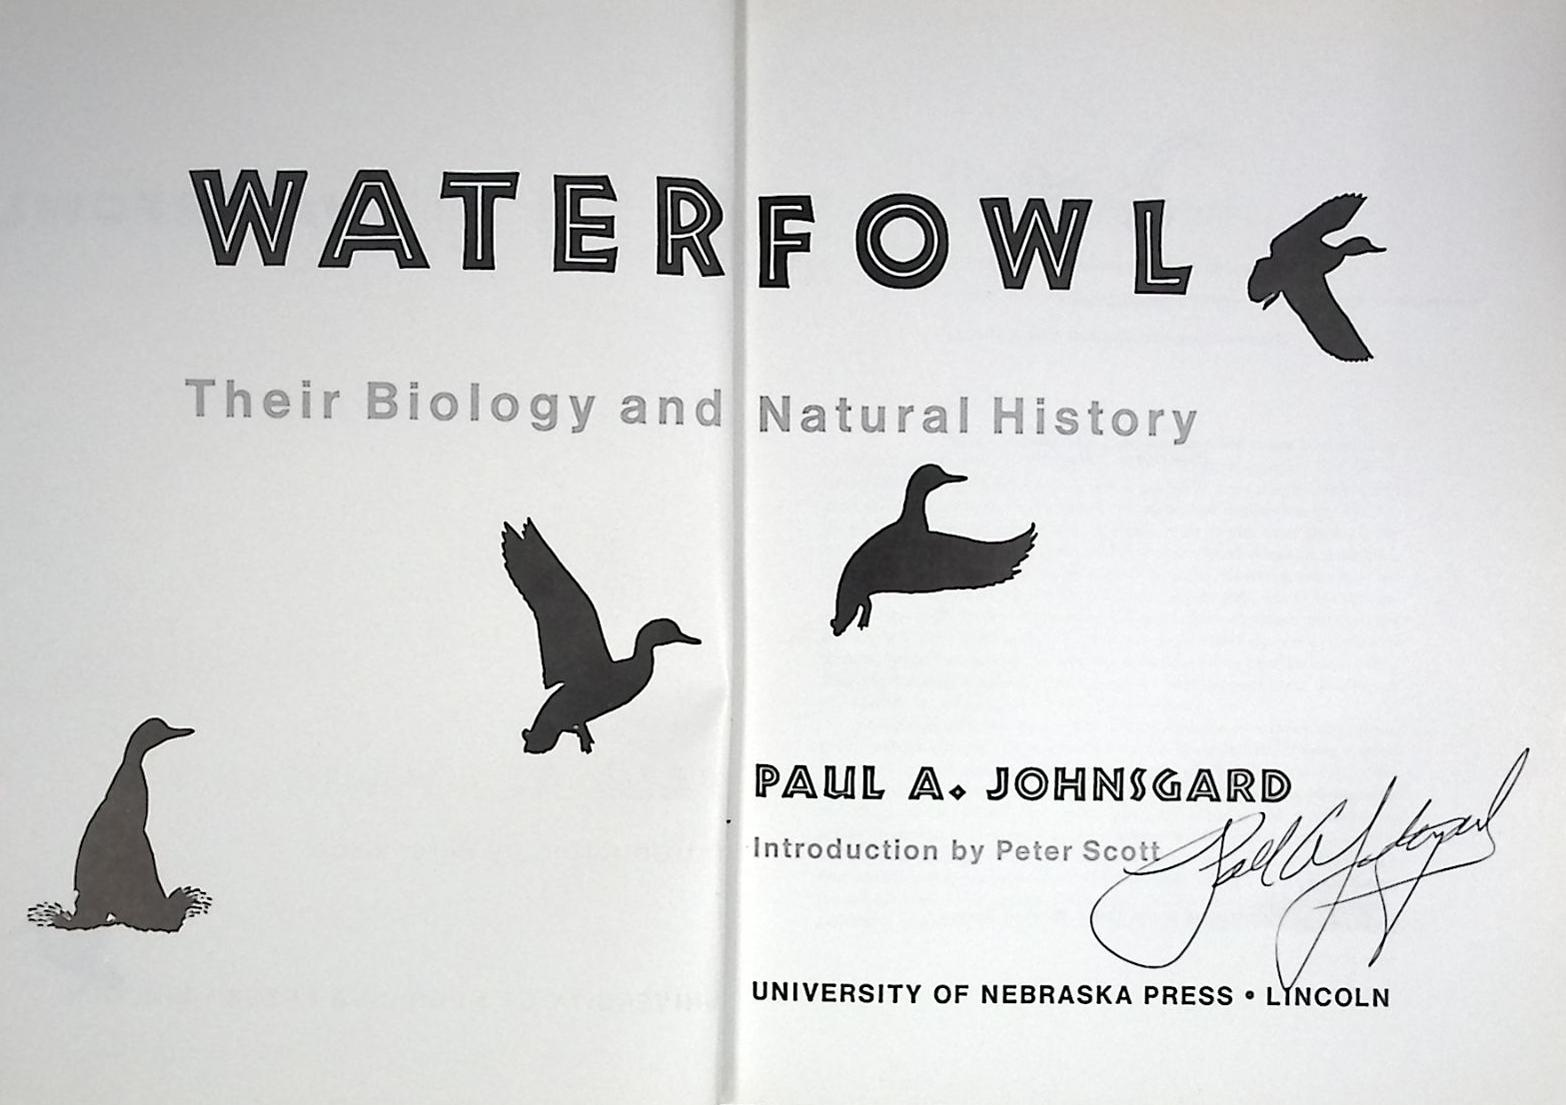 Waterfowl. Their Biology and Natural History. Signed copy.